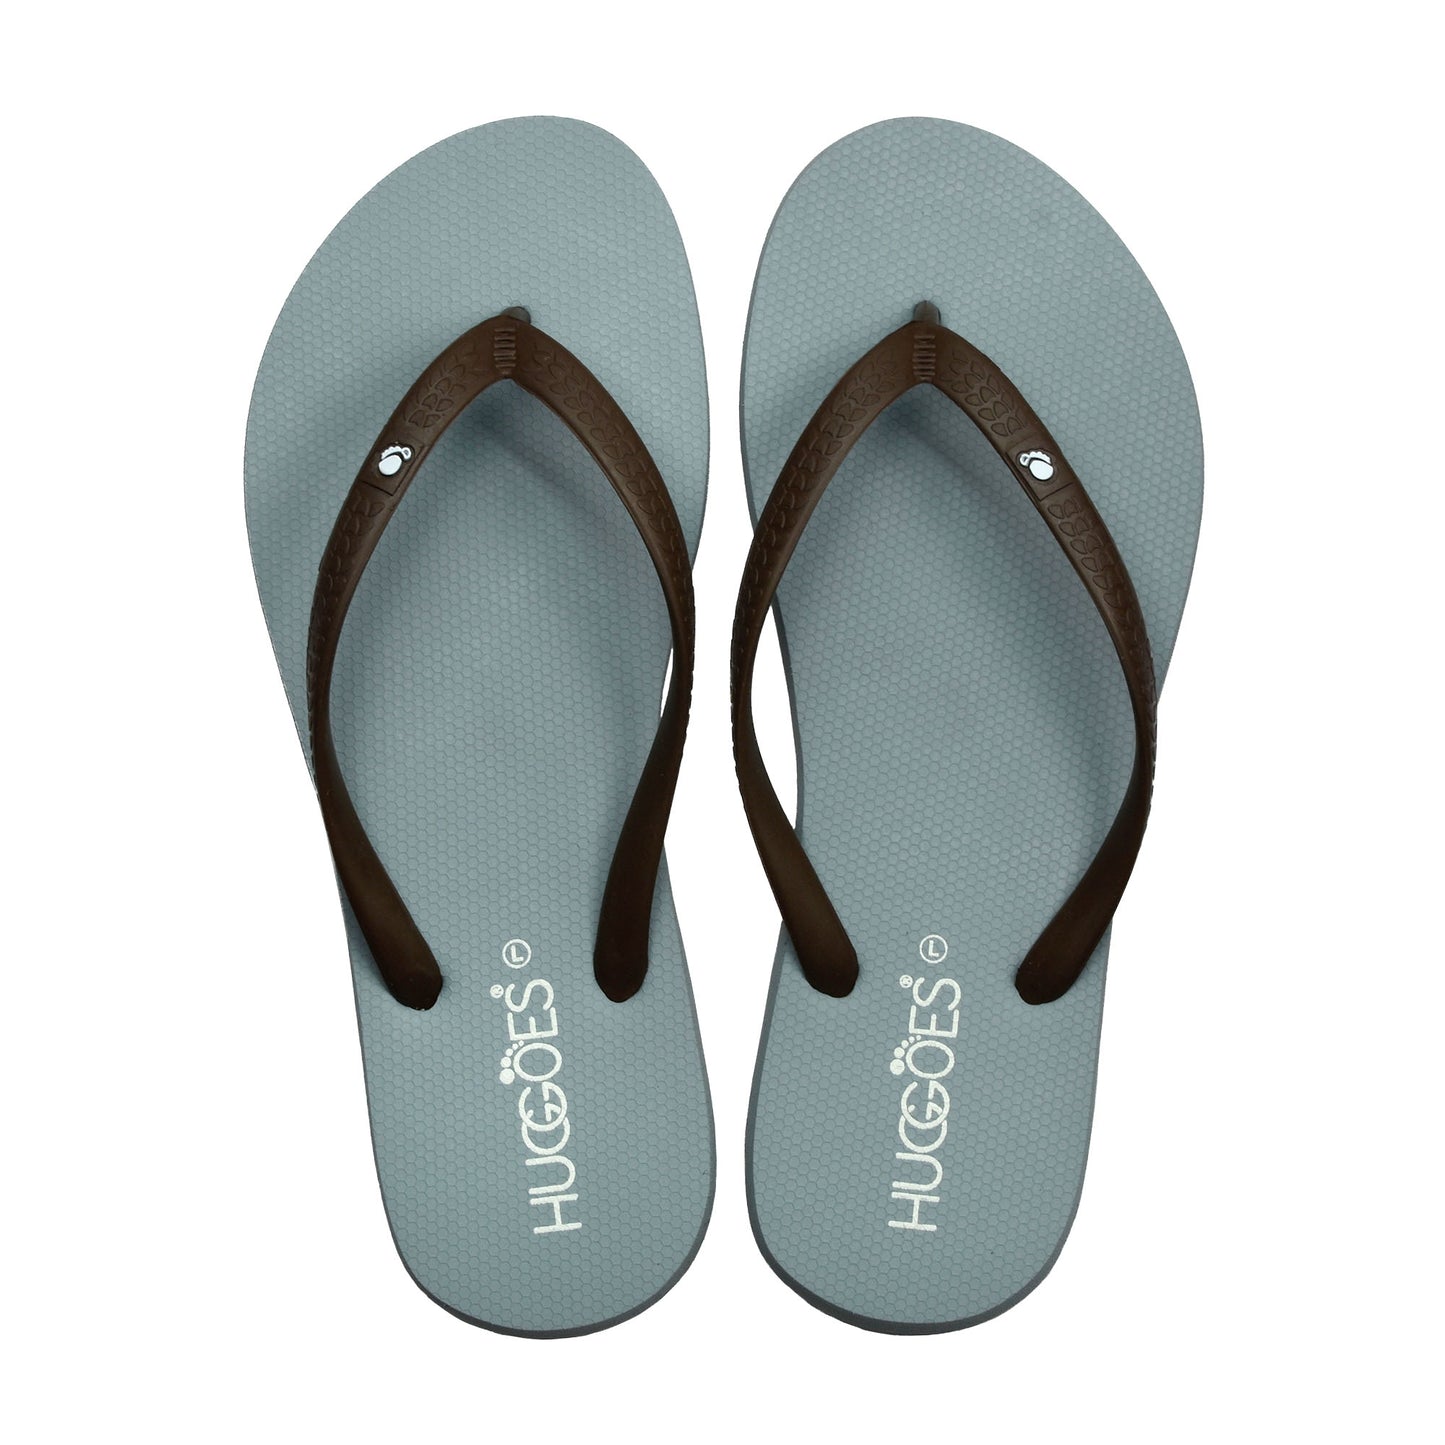 Huggoes By Aerothotic - Tinted Women's Natural Rubber Summer Flip-Flops - Original Thailand Imported - (BK2)